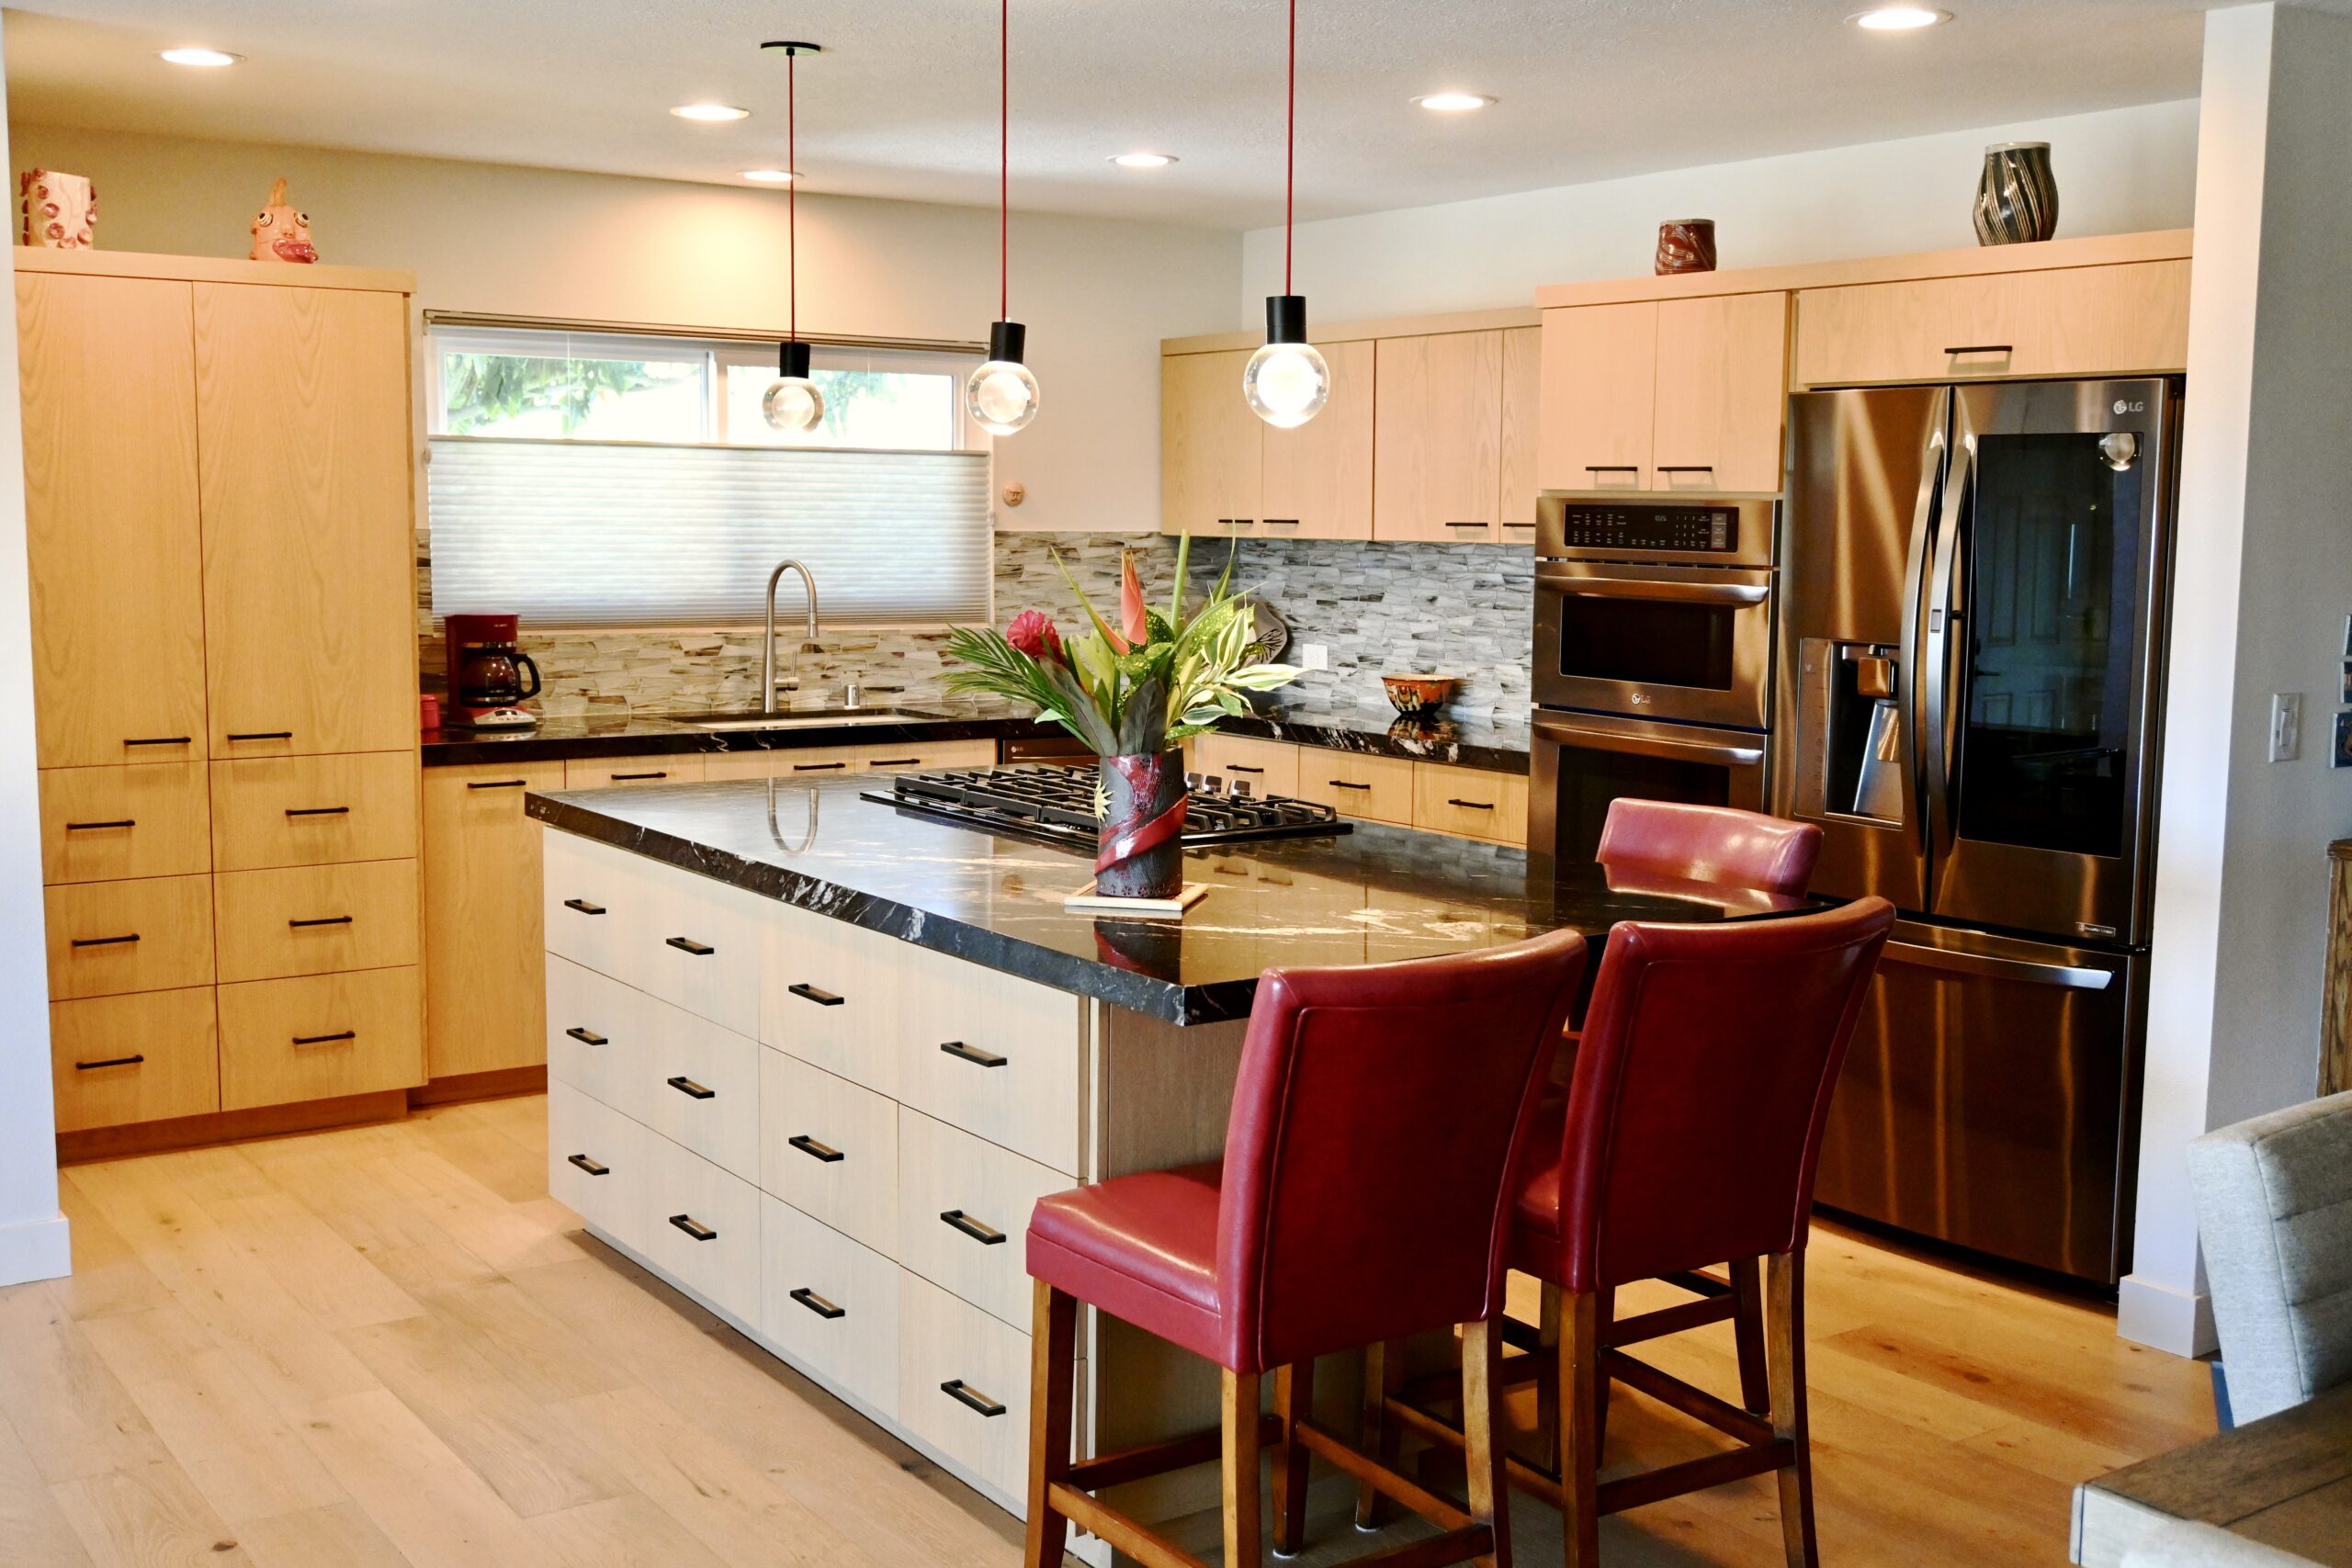 You are currently viewing A warm and modern kitchen with an artsy flair